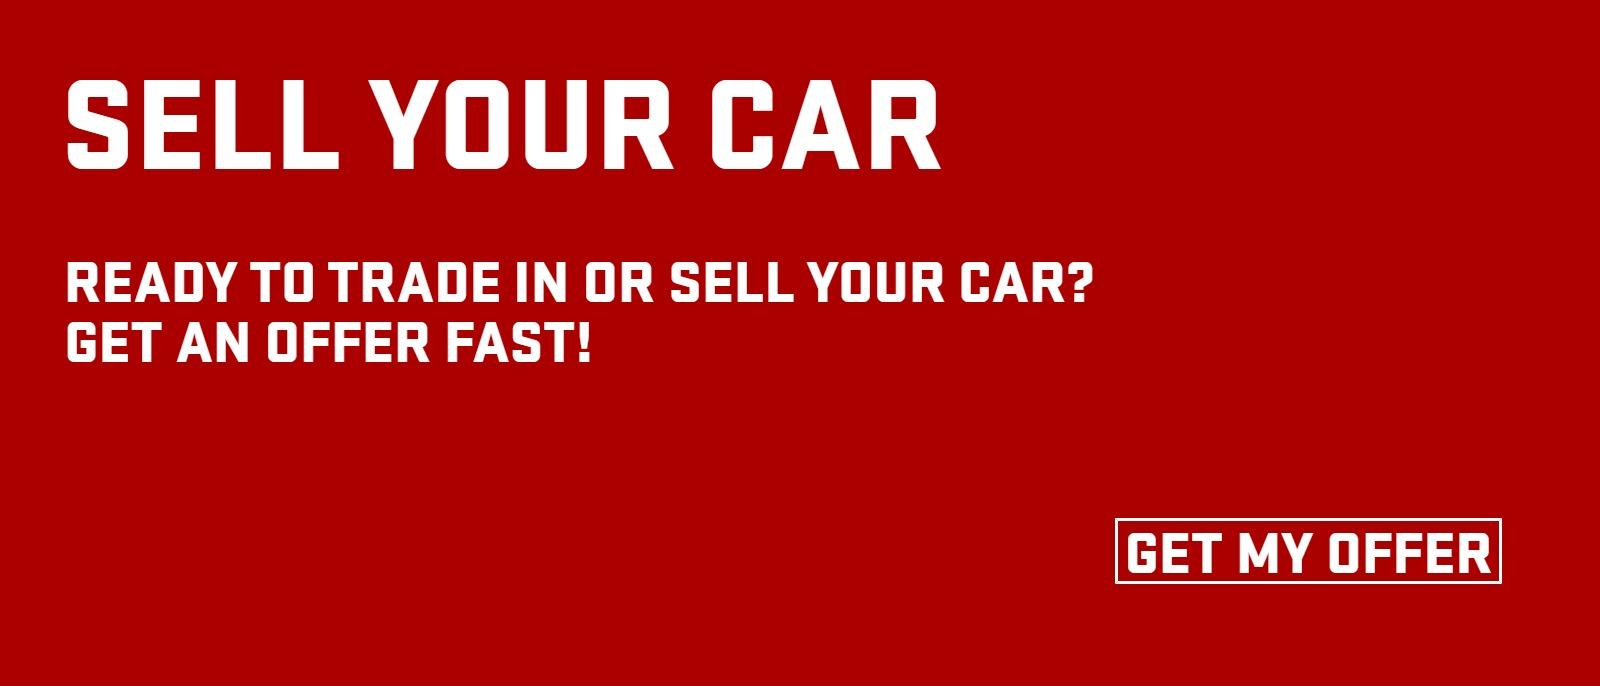 SELL YOUR CAR
READY TO TRADE IN OR SELL YOUR CAR? GET AN OFFER FAST!